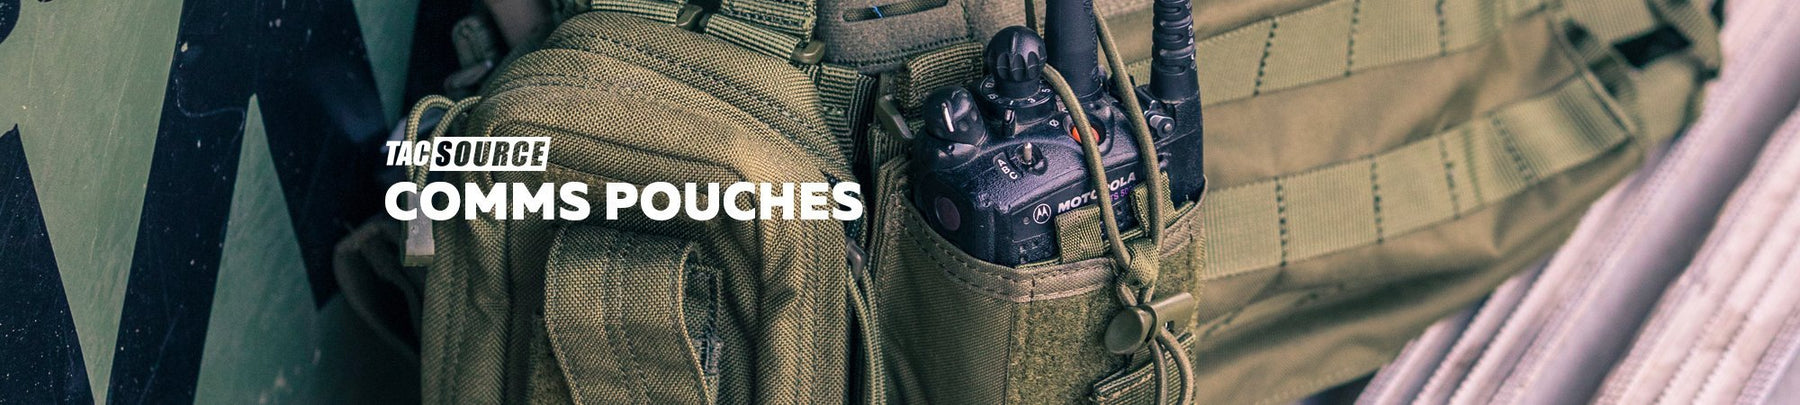 Comms Pouches-TacSource